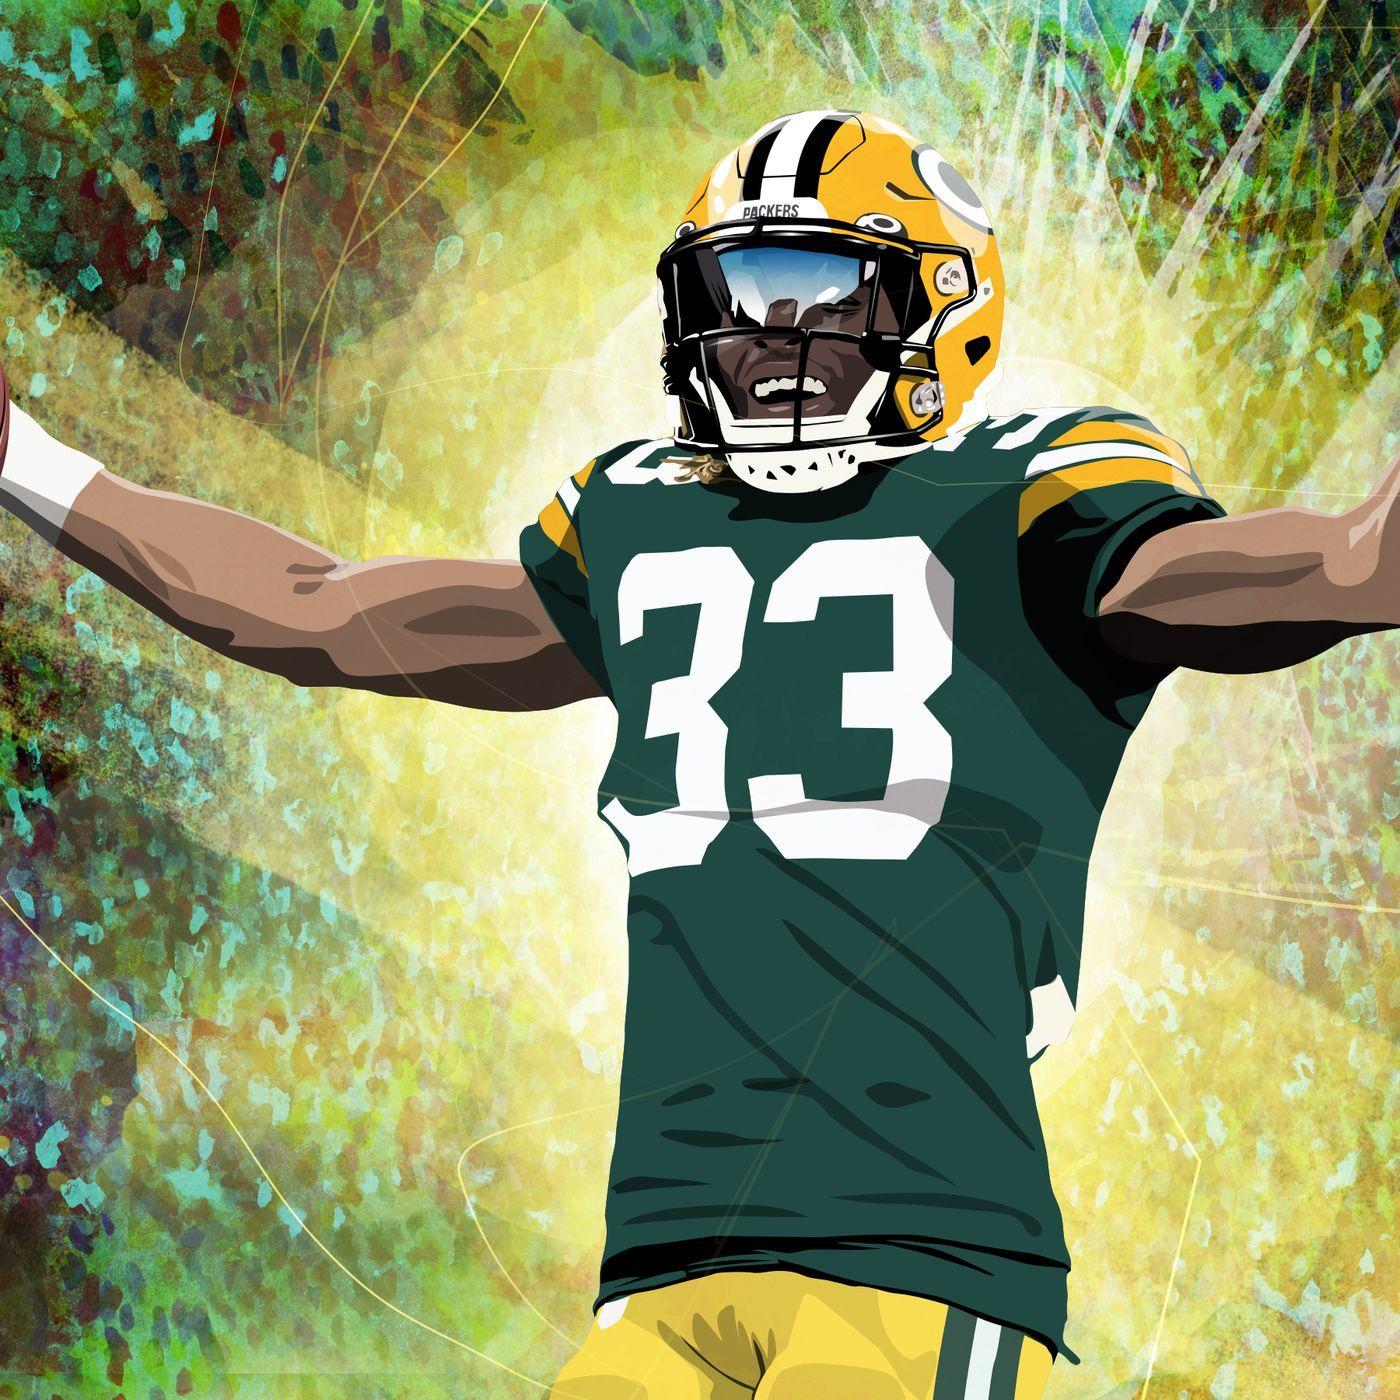 Amazoncom HAOLU Aaron Jones Art Football Player Poster Home Decor Poster  Wall Art Hanging Picture Print Bedroom Decorative Painting Posters Room  Aesthetic 20x30inch50x75cm Posters  Prints